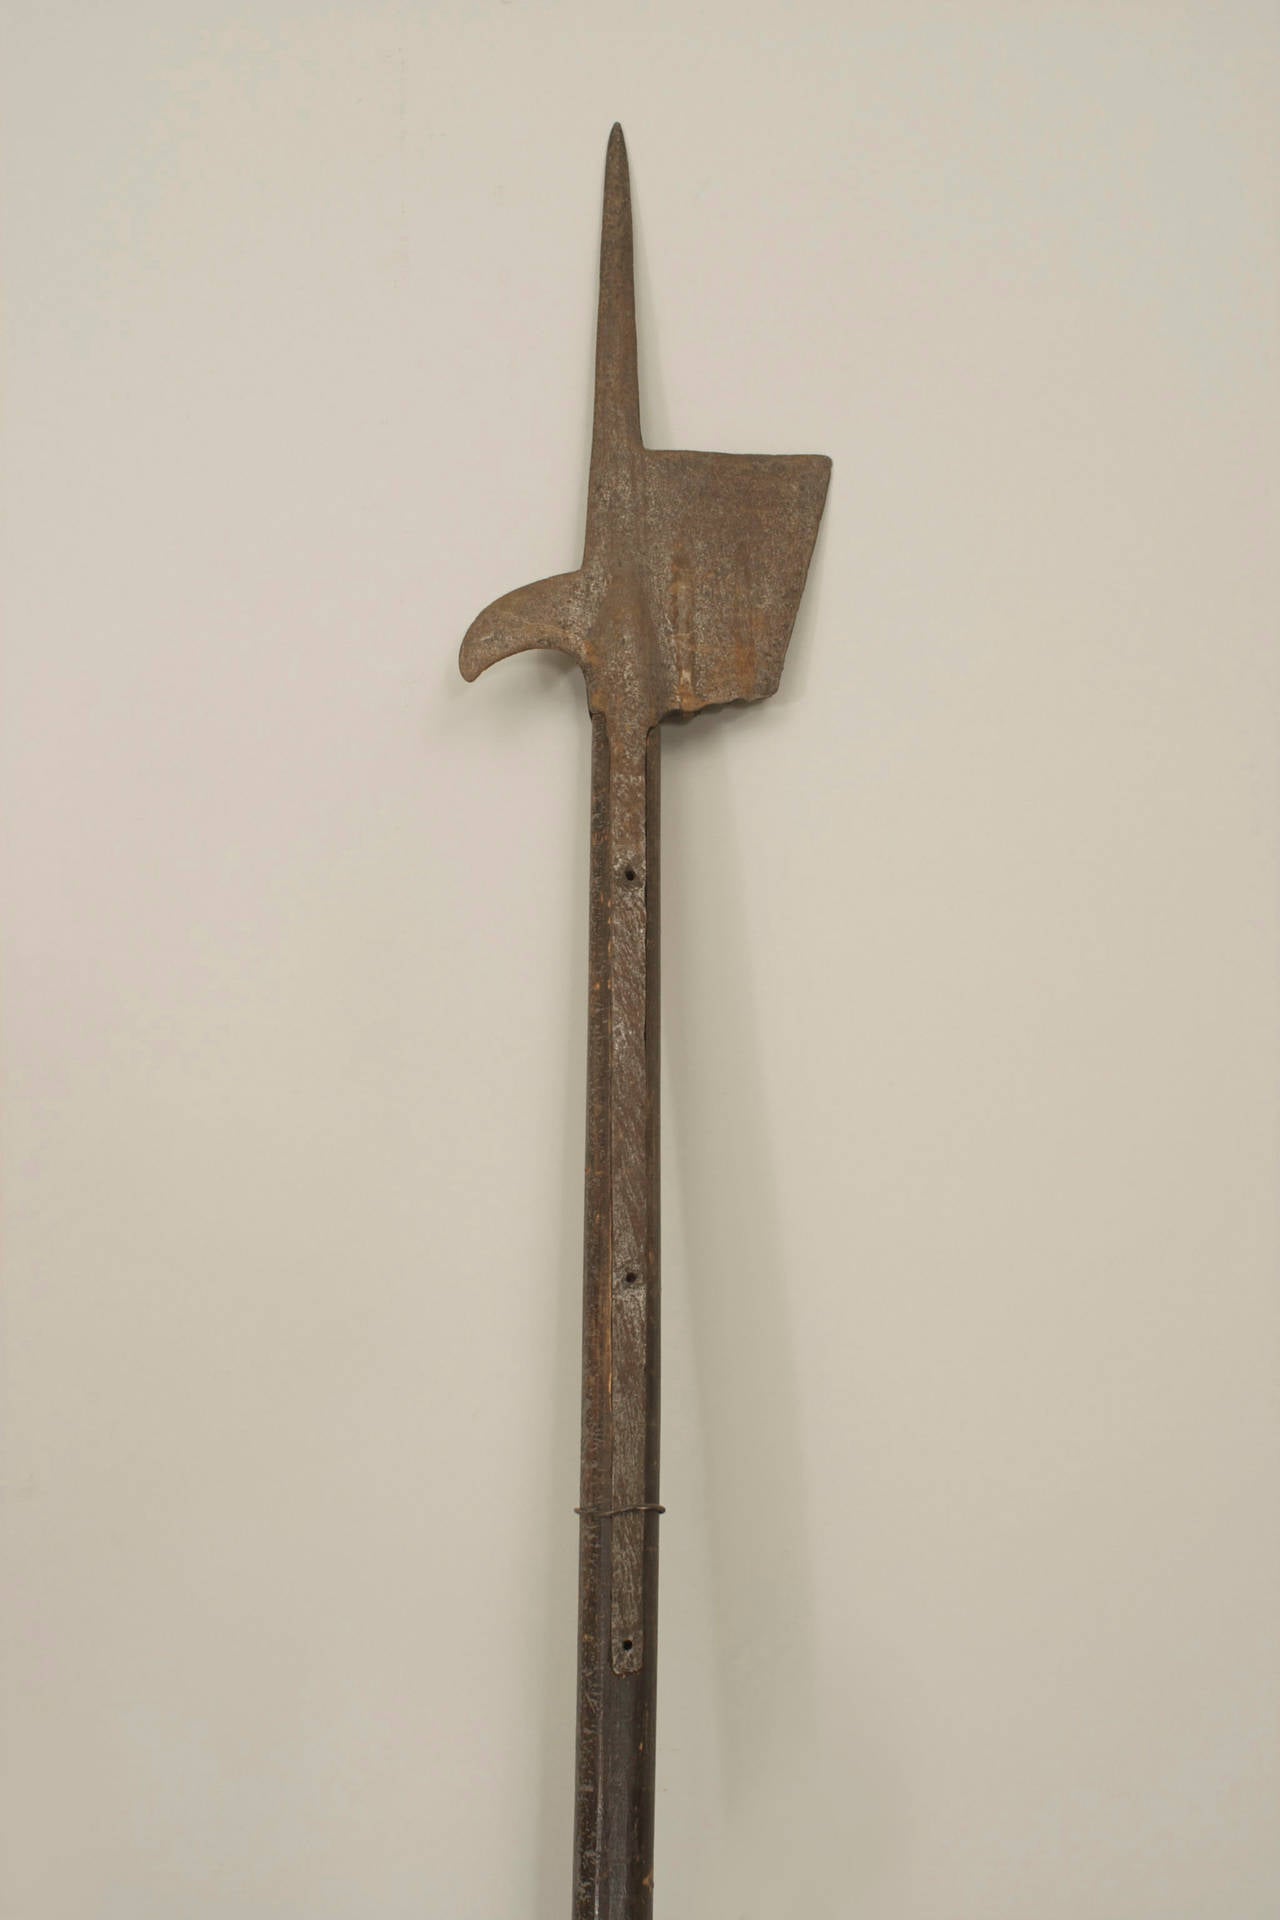 English Renaissance-style halberd spear with wood shaft and 33 ¬Ω inch iron ax blade.
